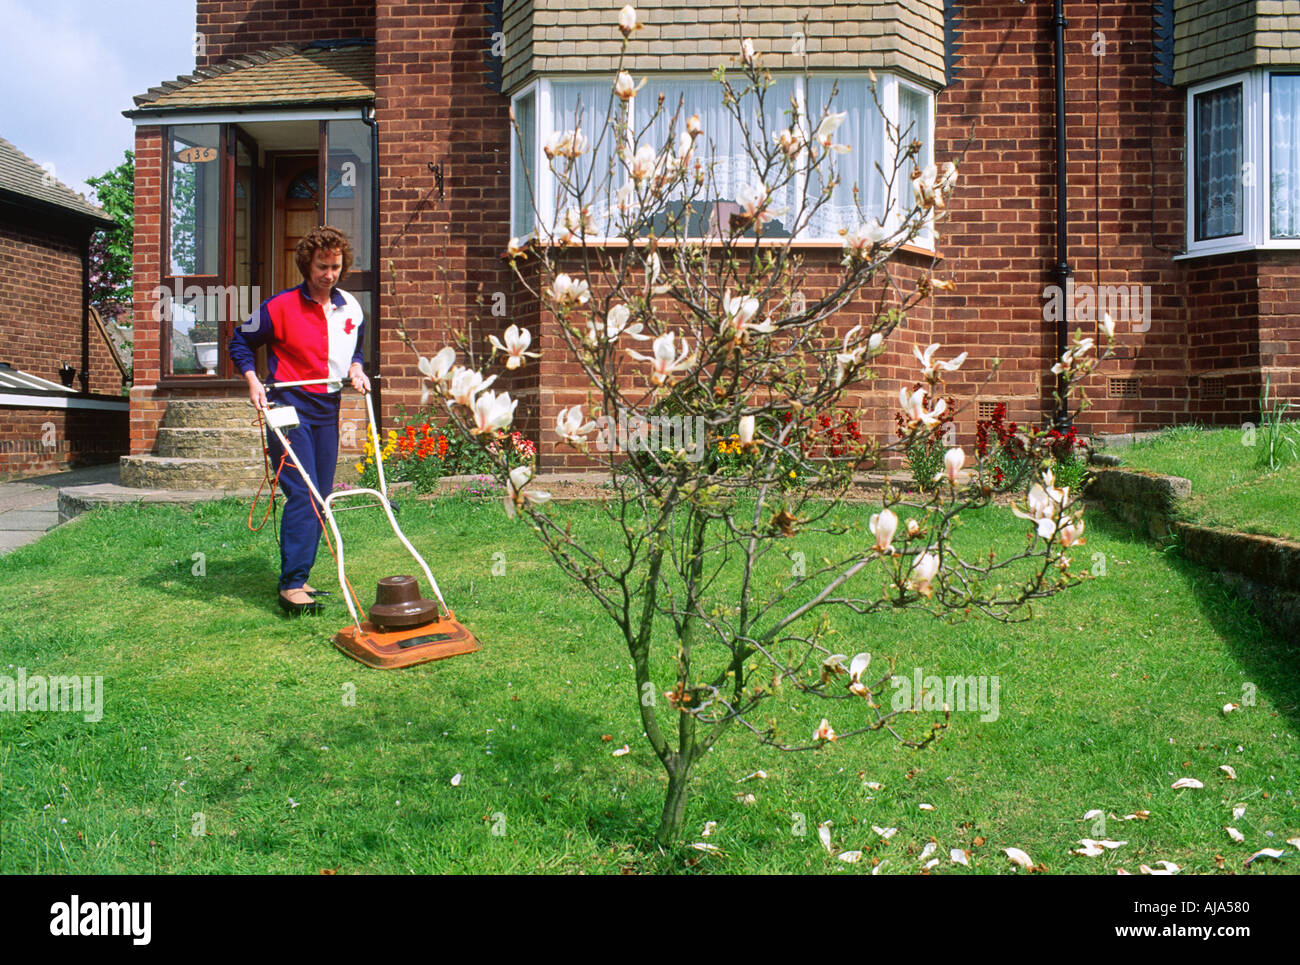 UK England Mowing the lawn SB Stock Photo